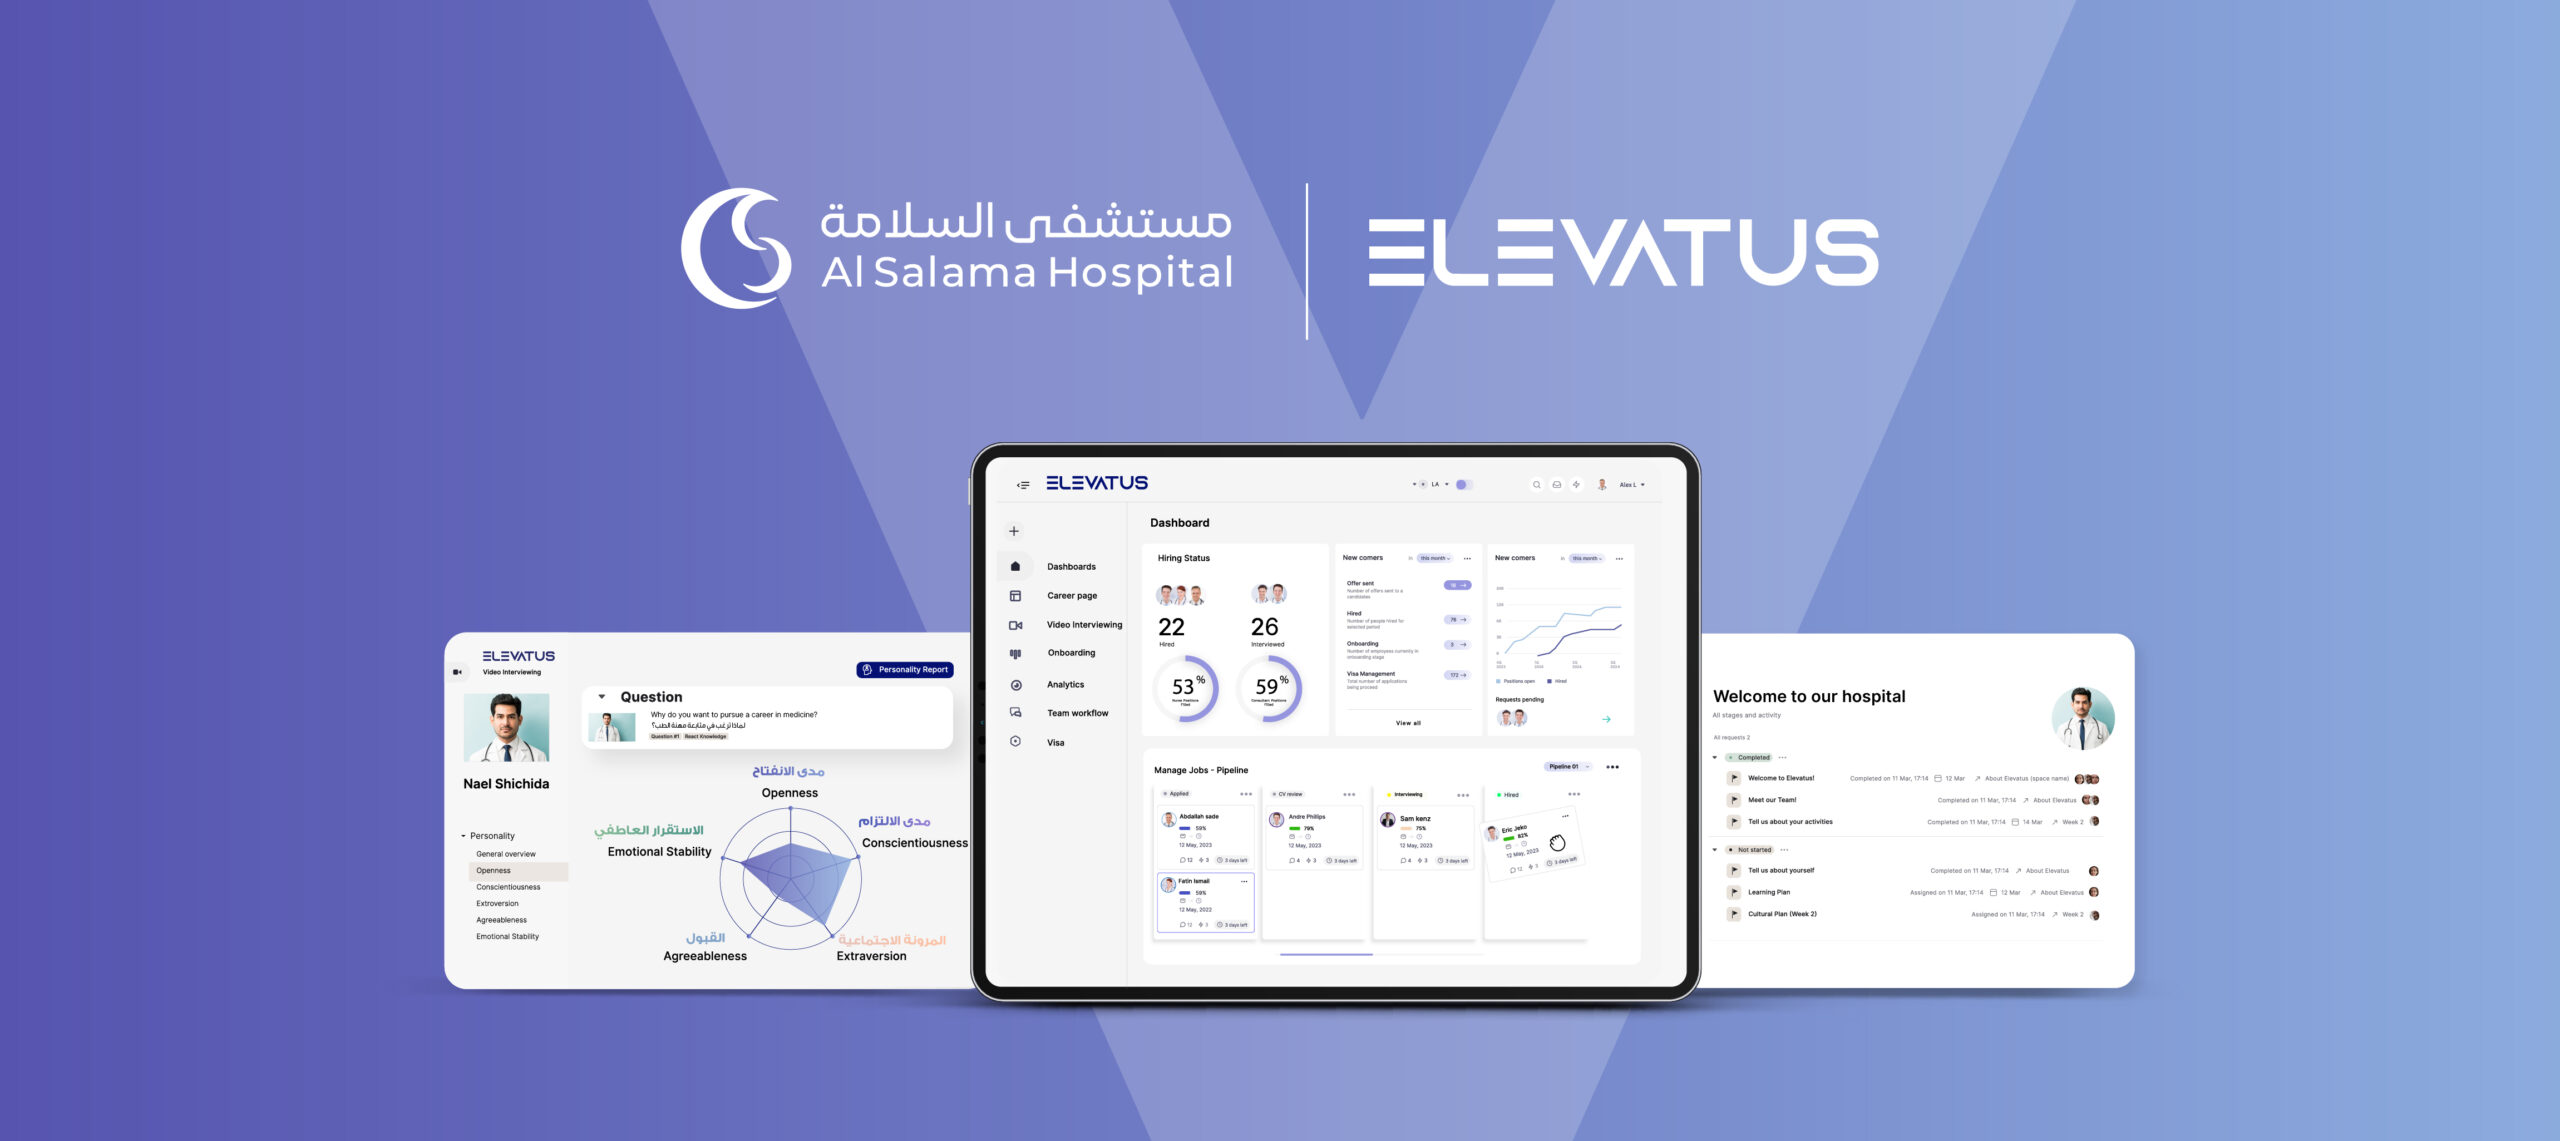 Al Salama Hospital Renews and Expands Partnership with Elevatus For Three Years to Advance Healthcare Recruiting